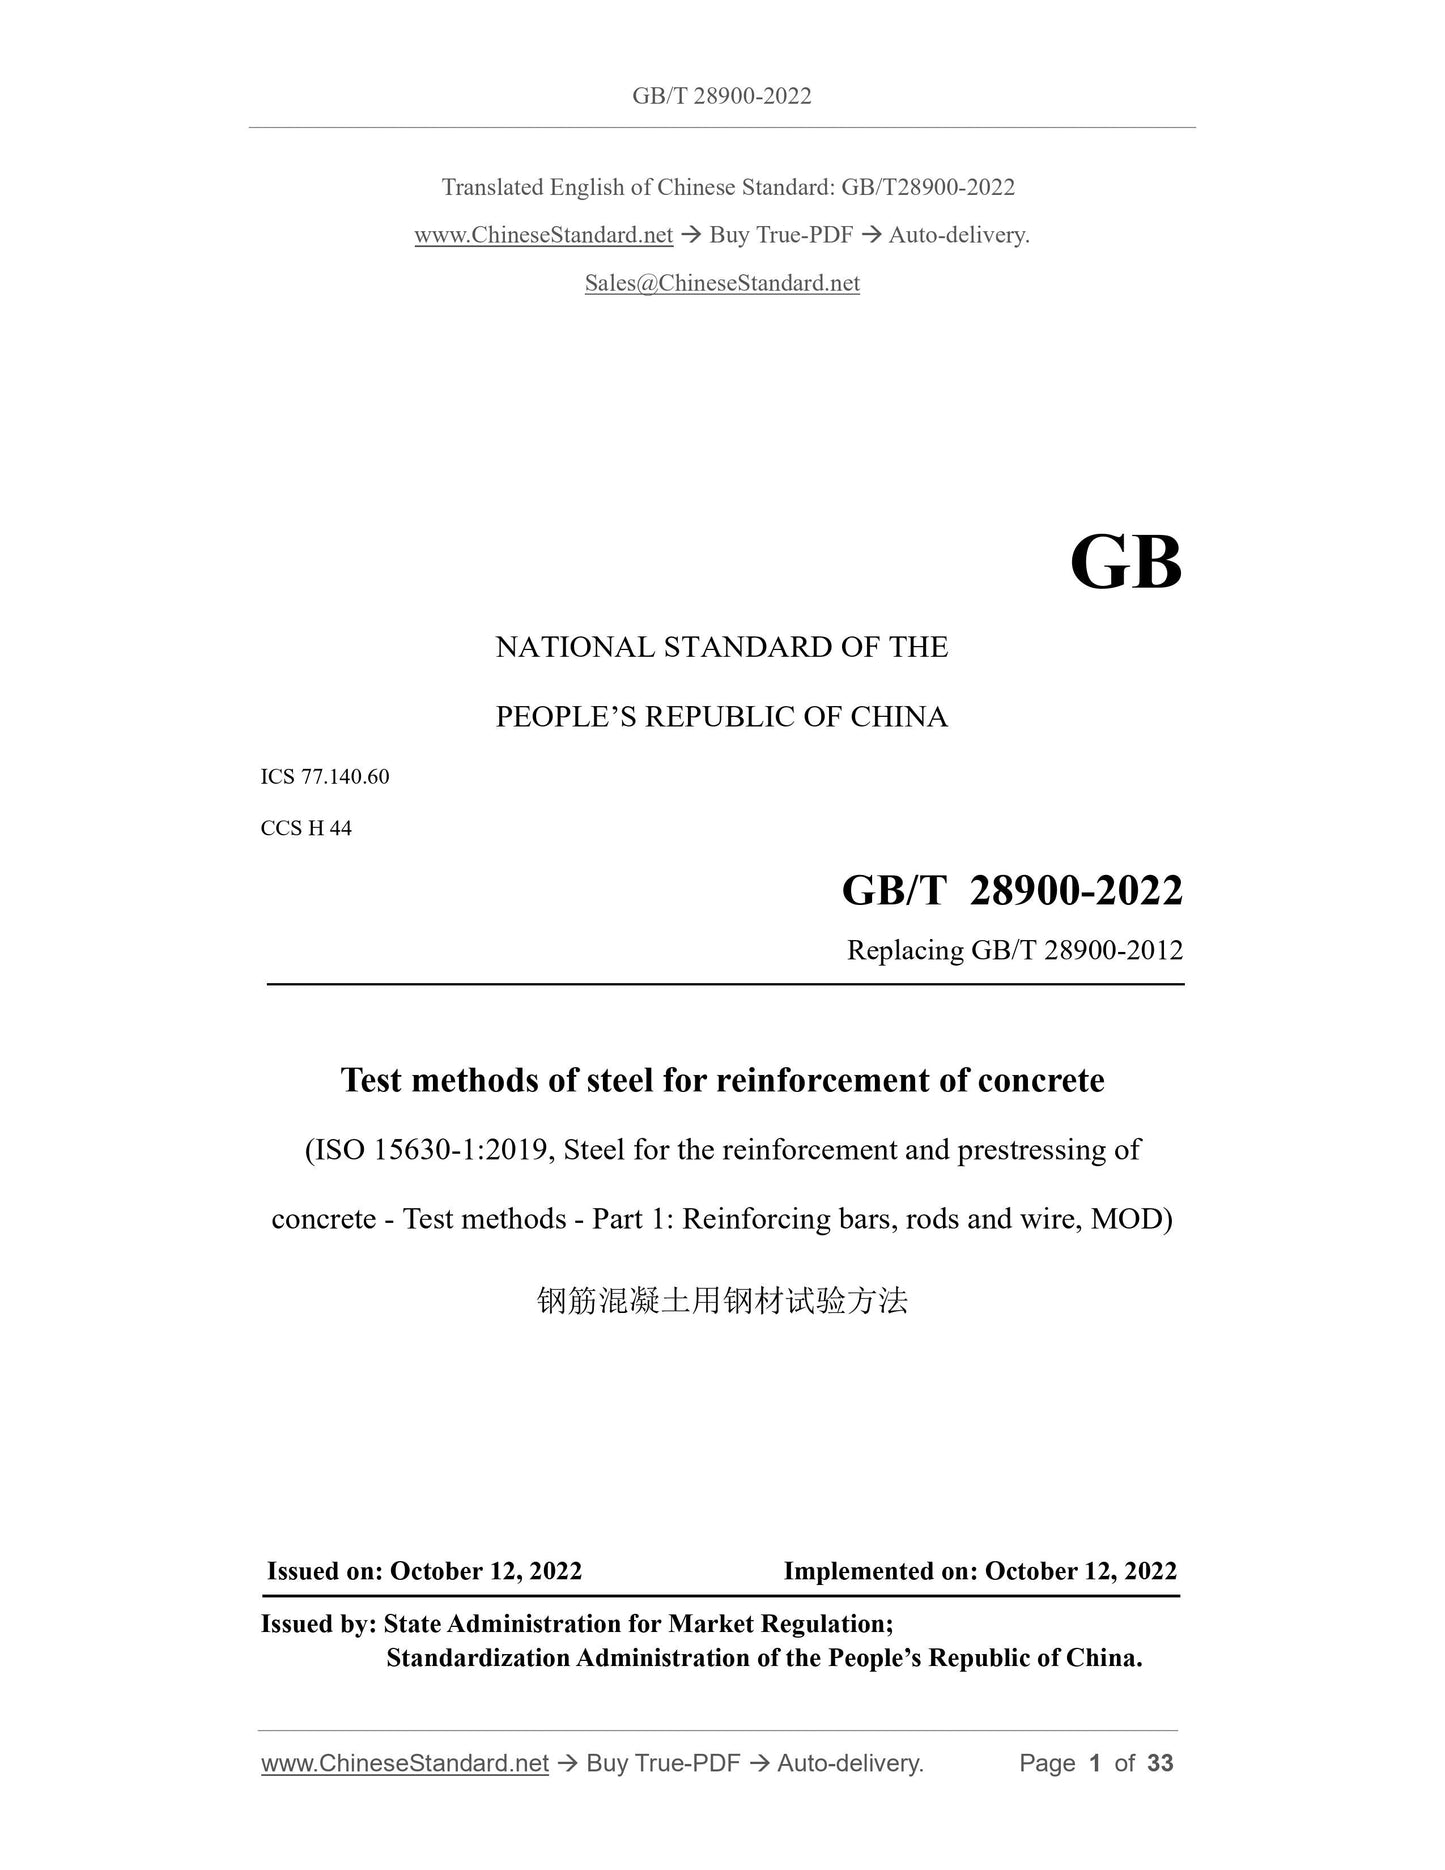 GB/T 28900-2022 Page 1